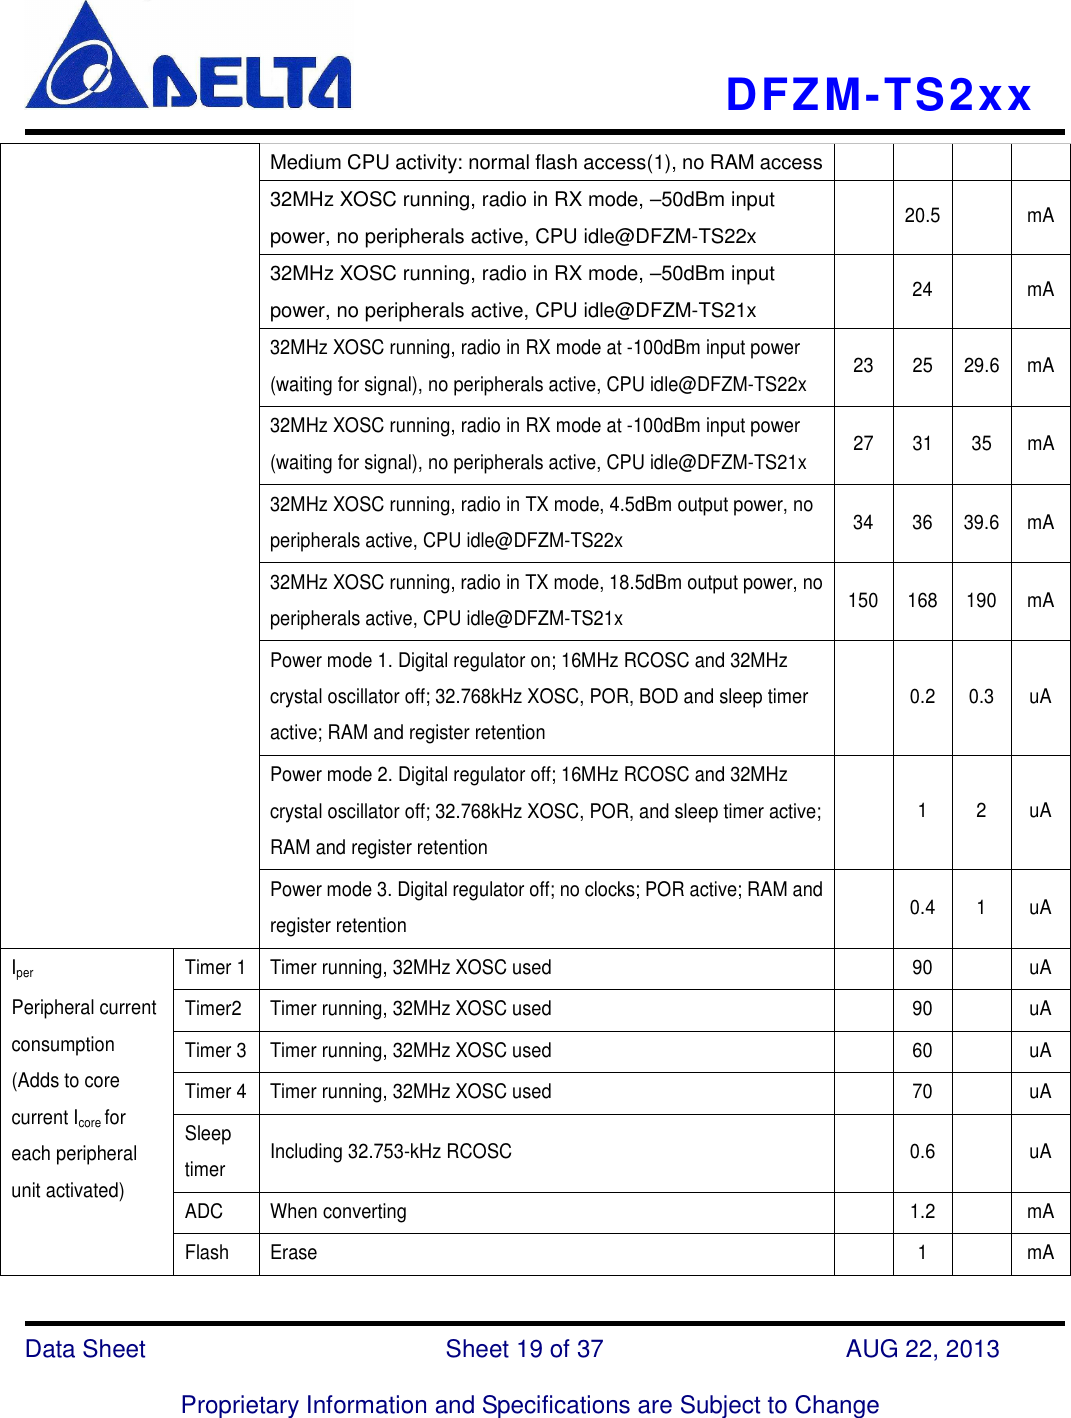    DFZM-TS2xx   Data Sheet                              Sheet 19 of 37                    AUG 22, 2013  Proprietary Information and Specifications are Subject to Change Medium CPU activity: normal flash access(1), no RAM access 32MHz XOSC running, radio in RX mode, –50dBm input power, no peripherals active, CPU idle@DFZM-TS22x   20.5   mA 32MHz XOSC running, radio in RX mode, –50dBm input power, no peripherals active, CPU idle@DFZM-TS21x   24    mA 32MHz XOSC running, radio in RX mode at -100dBm input power (waiting for signal), no peripherals active, CPU idle@DFZM-TS22x  23  25  29.6 mA 32MHz XOSC running, radio in RX mode at -100dBm input power (waiting for signal), no peripherals active, CPU idle@DFZM-TS21x  27  31  35  mA 32MHz XOSC running, radio in TX mode, 4.5dBm output power, no peripherals active, CPU idle@DFZM-TS22x  34  36  39.6 mA 32MHz XOSC running, radio in TX mode, 18.5dBm output power, no peripherals active, CPU idle@DFZM-TS21x  150 168 190 mA Power mode 1. Digital regulator on; 16MHz RCOSC and 32MHz crystal oscillator off; 32.768kHz XOSC, POR, BOD and sleep timer active; RAM and register retention   0.2 0.3 uA Power mode 2. Digital regulator off; 16MHz RCOSC and 32MHz crystal oscillator off; 32.768kHz XOSC, POR, and sleep timer active; RAM and register retention   1  2  uA Power mode 3. Digital regulator off; no clocks; POR active; RAM and register retention    0.4 1  uA Timer 1 Timer running, 32MHz XOSC used    90    uA Timer2 Timer running, 32MHz XOSC used    90    uA Timer 3 Timer running, 32MHz XOSC used    60    uA Timer 4 Timer running, 32MHz XOSC used    70    uA Sleep timer  Including 32.753-kHz RCOSC    0.6   uA ADC  When converting    1.2   mA Iper   Peripheral current consumption (Adds to core current Icore for each peripheral unit activated) Flash  Erase    1    mA 